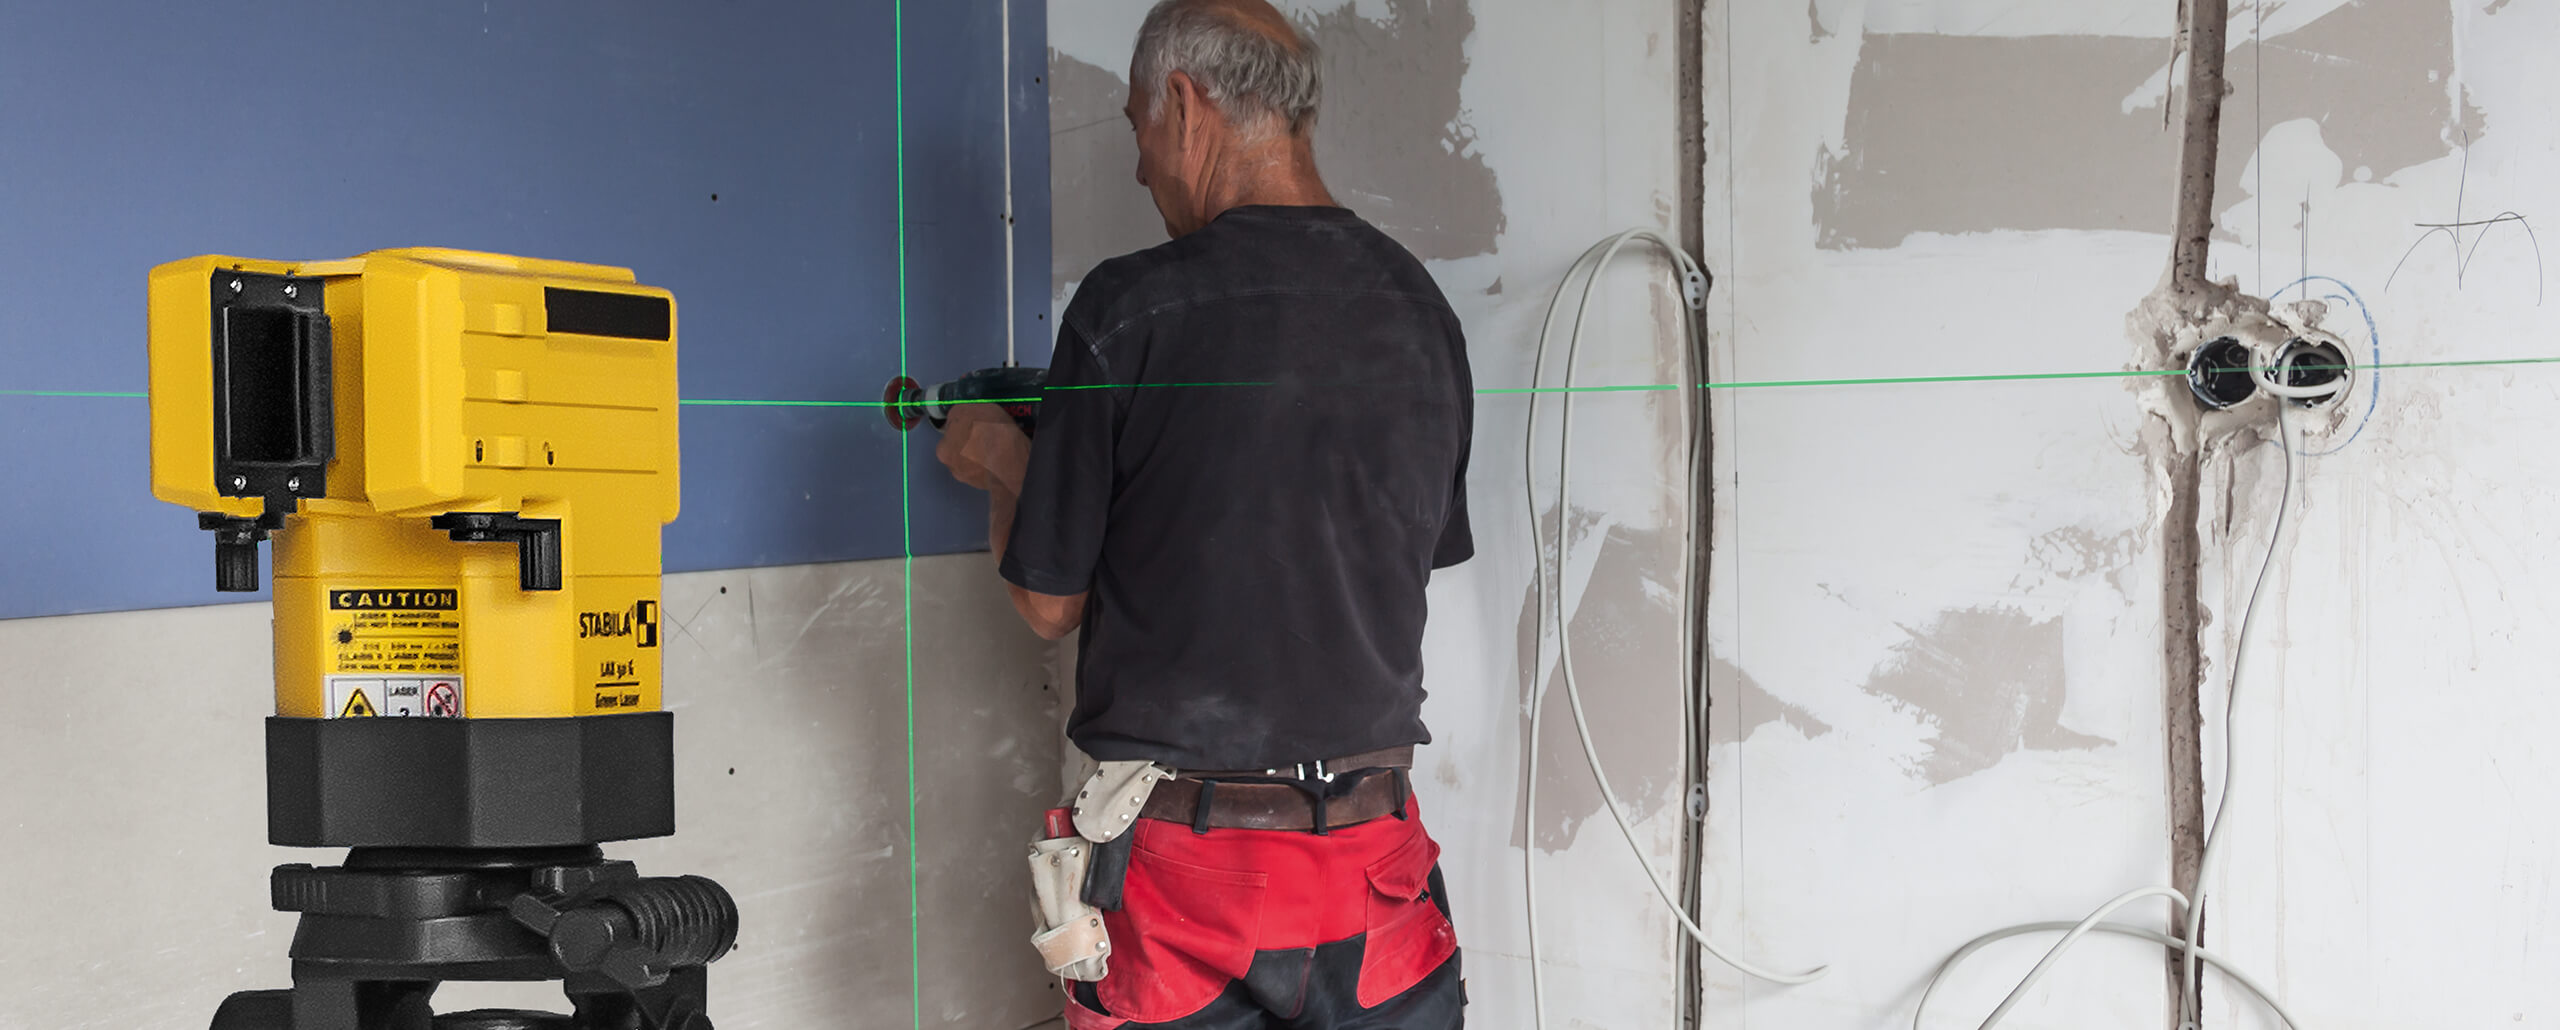 What Is The Best Laser Level To Buy For Electricians